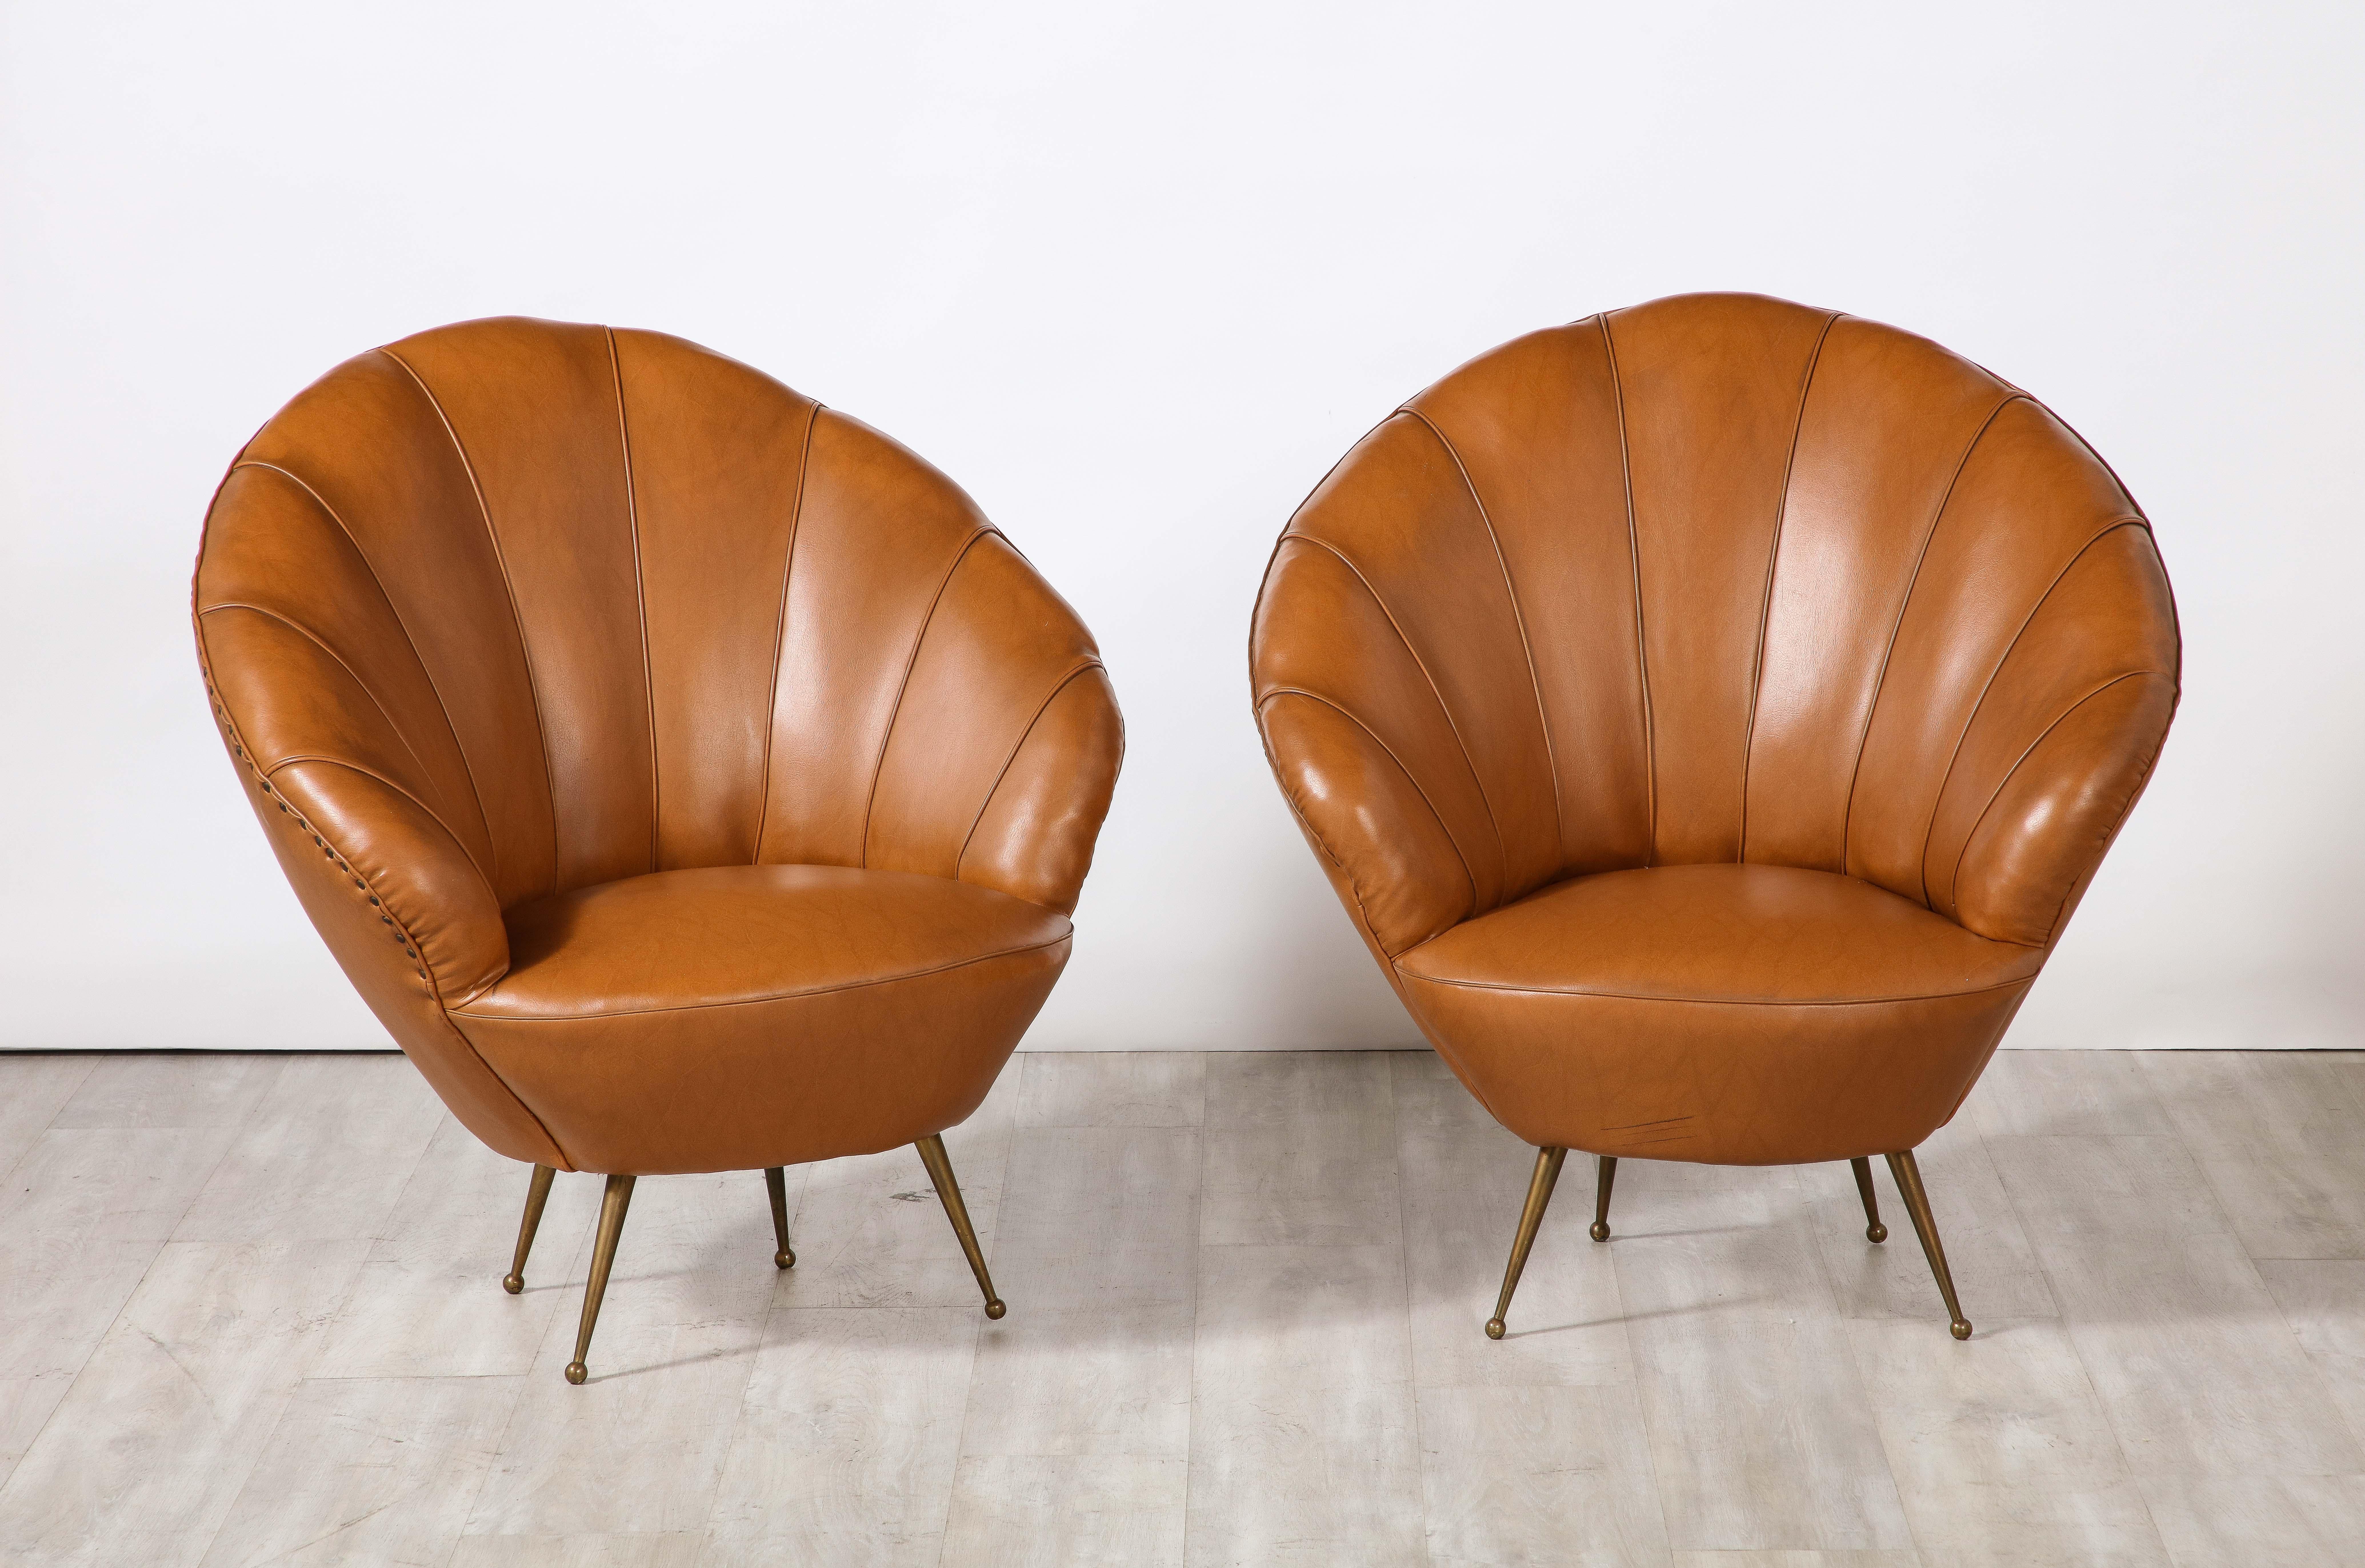 Pair of Italian Modernist Leather Scalloped Lounge Chairs, Circa 1950  In Good Condition For Sale In New York, NY